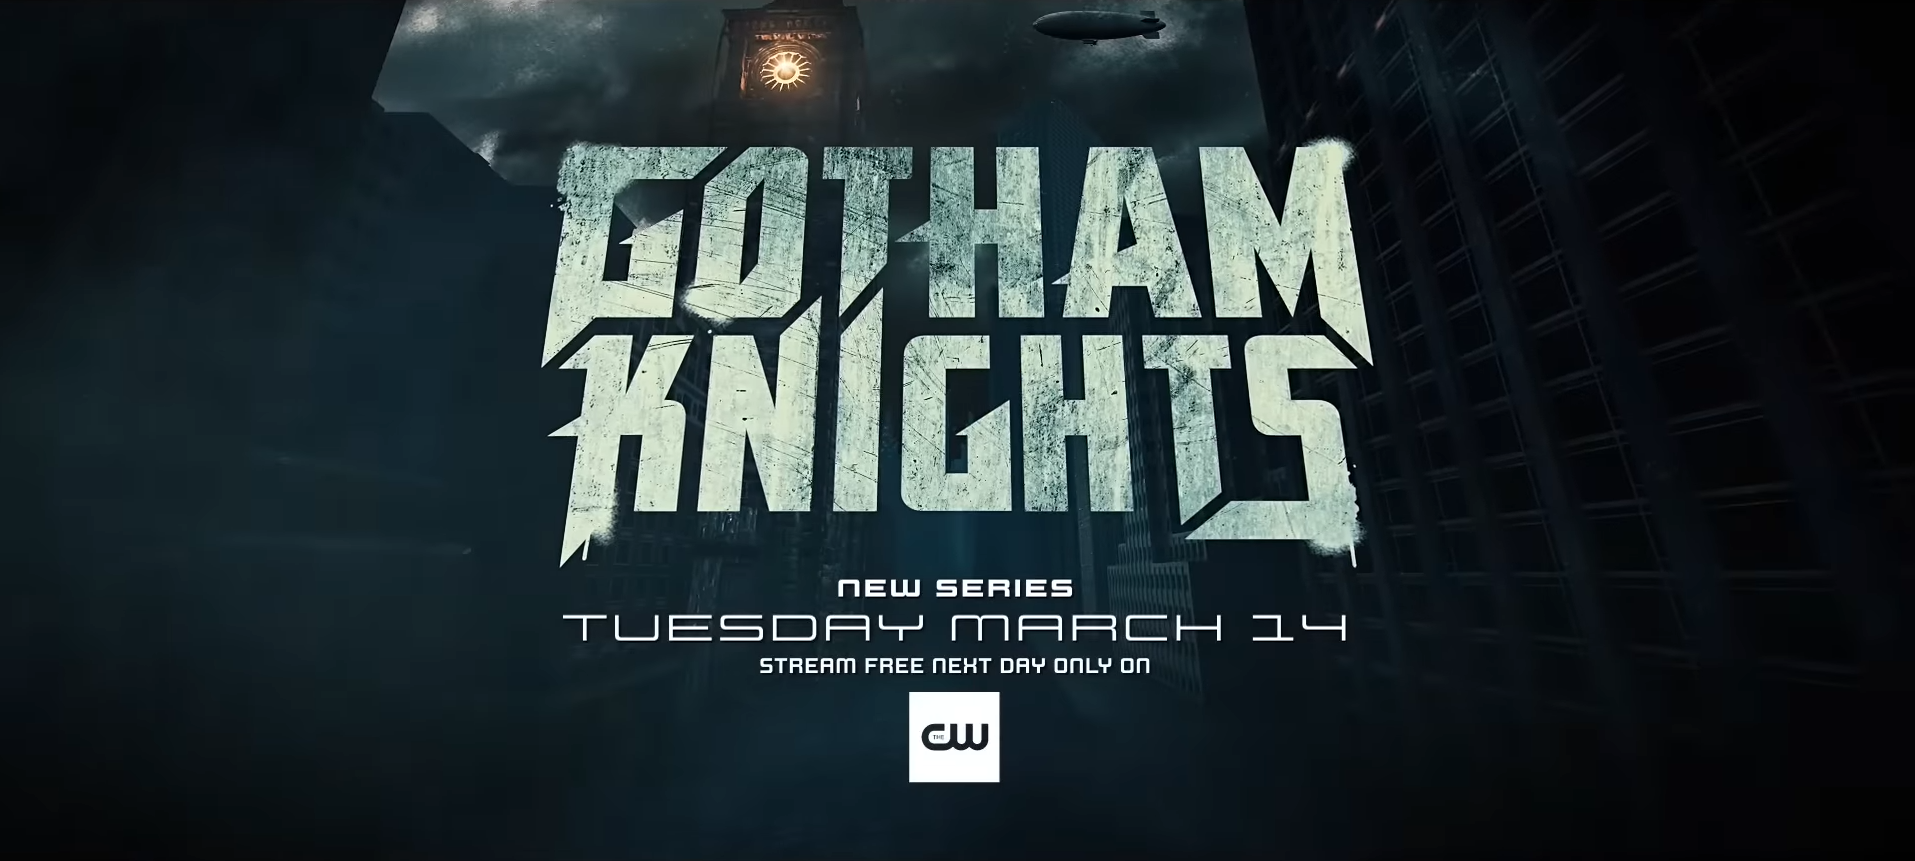 A 'Gotham Knights' TV Series Is In the Works at The CW